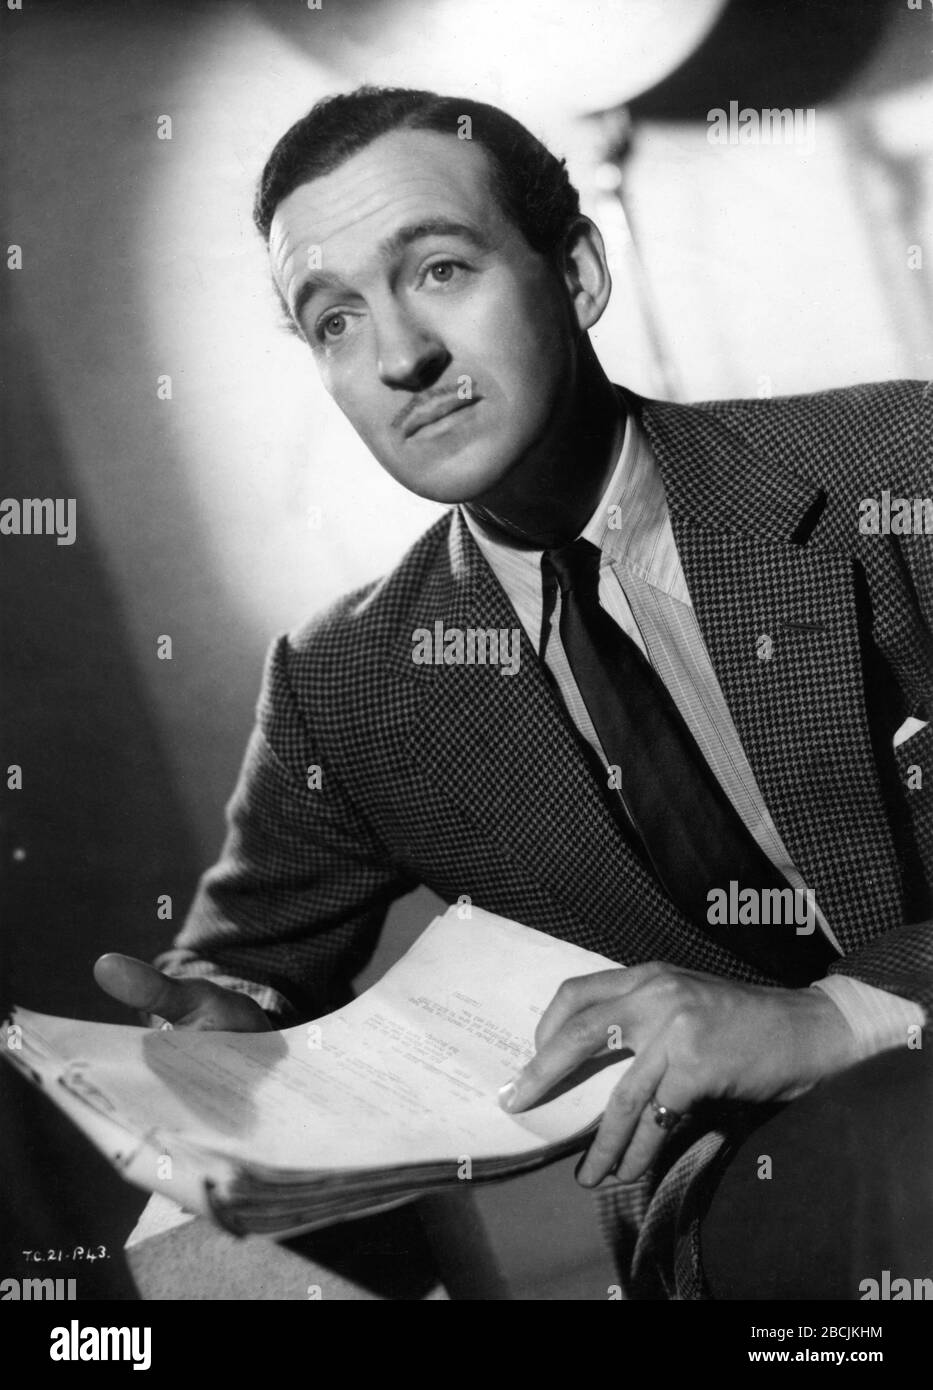 DAVID NIVEN Candid Publicity Portrait for THE WAY AHEAD 1944 director CAROL REED original story Eric Ambler screenplay Eric Ambler and Peter Ustinov Two Cities Films / Eagle - Lion Distributors Ltd Stock Photo